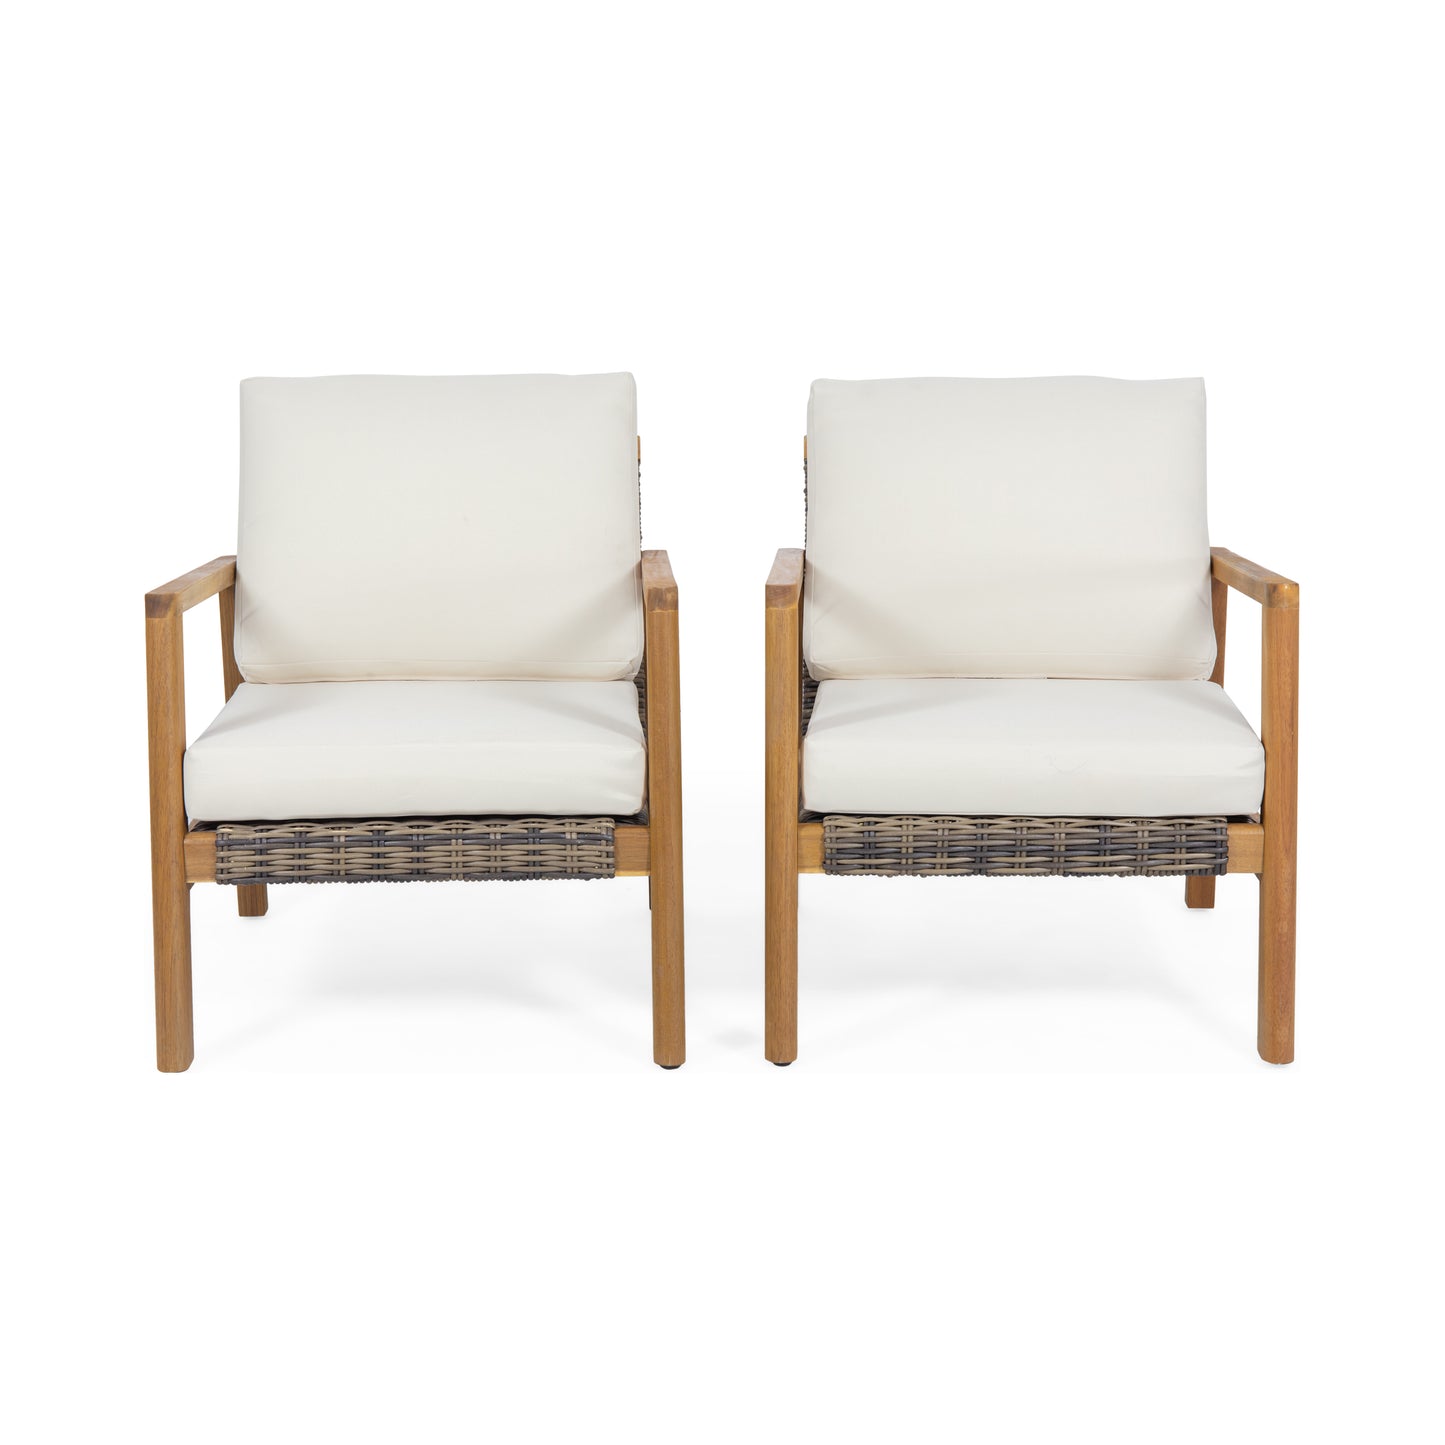 Kedan Outdoor Acacia Wood Club Chairs with Wicker Accents (Set of 2)